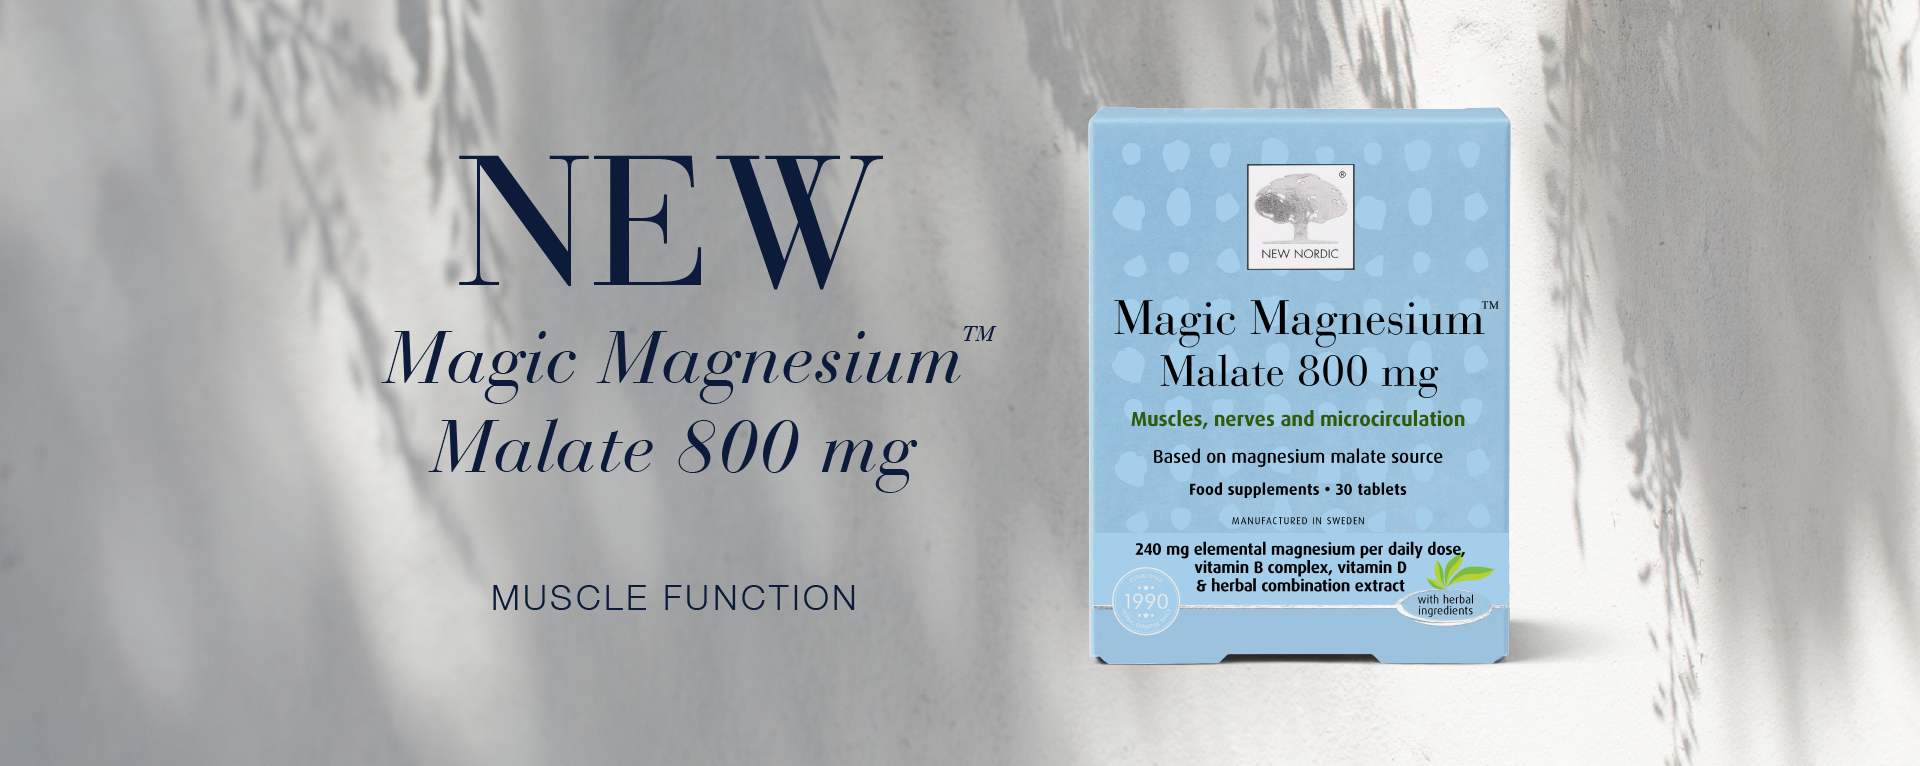 New Magic Magnesium™ Malate 800 mg pack by New Nordic